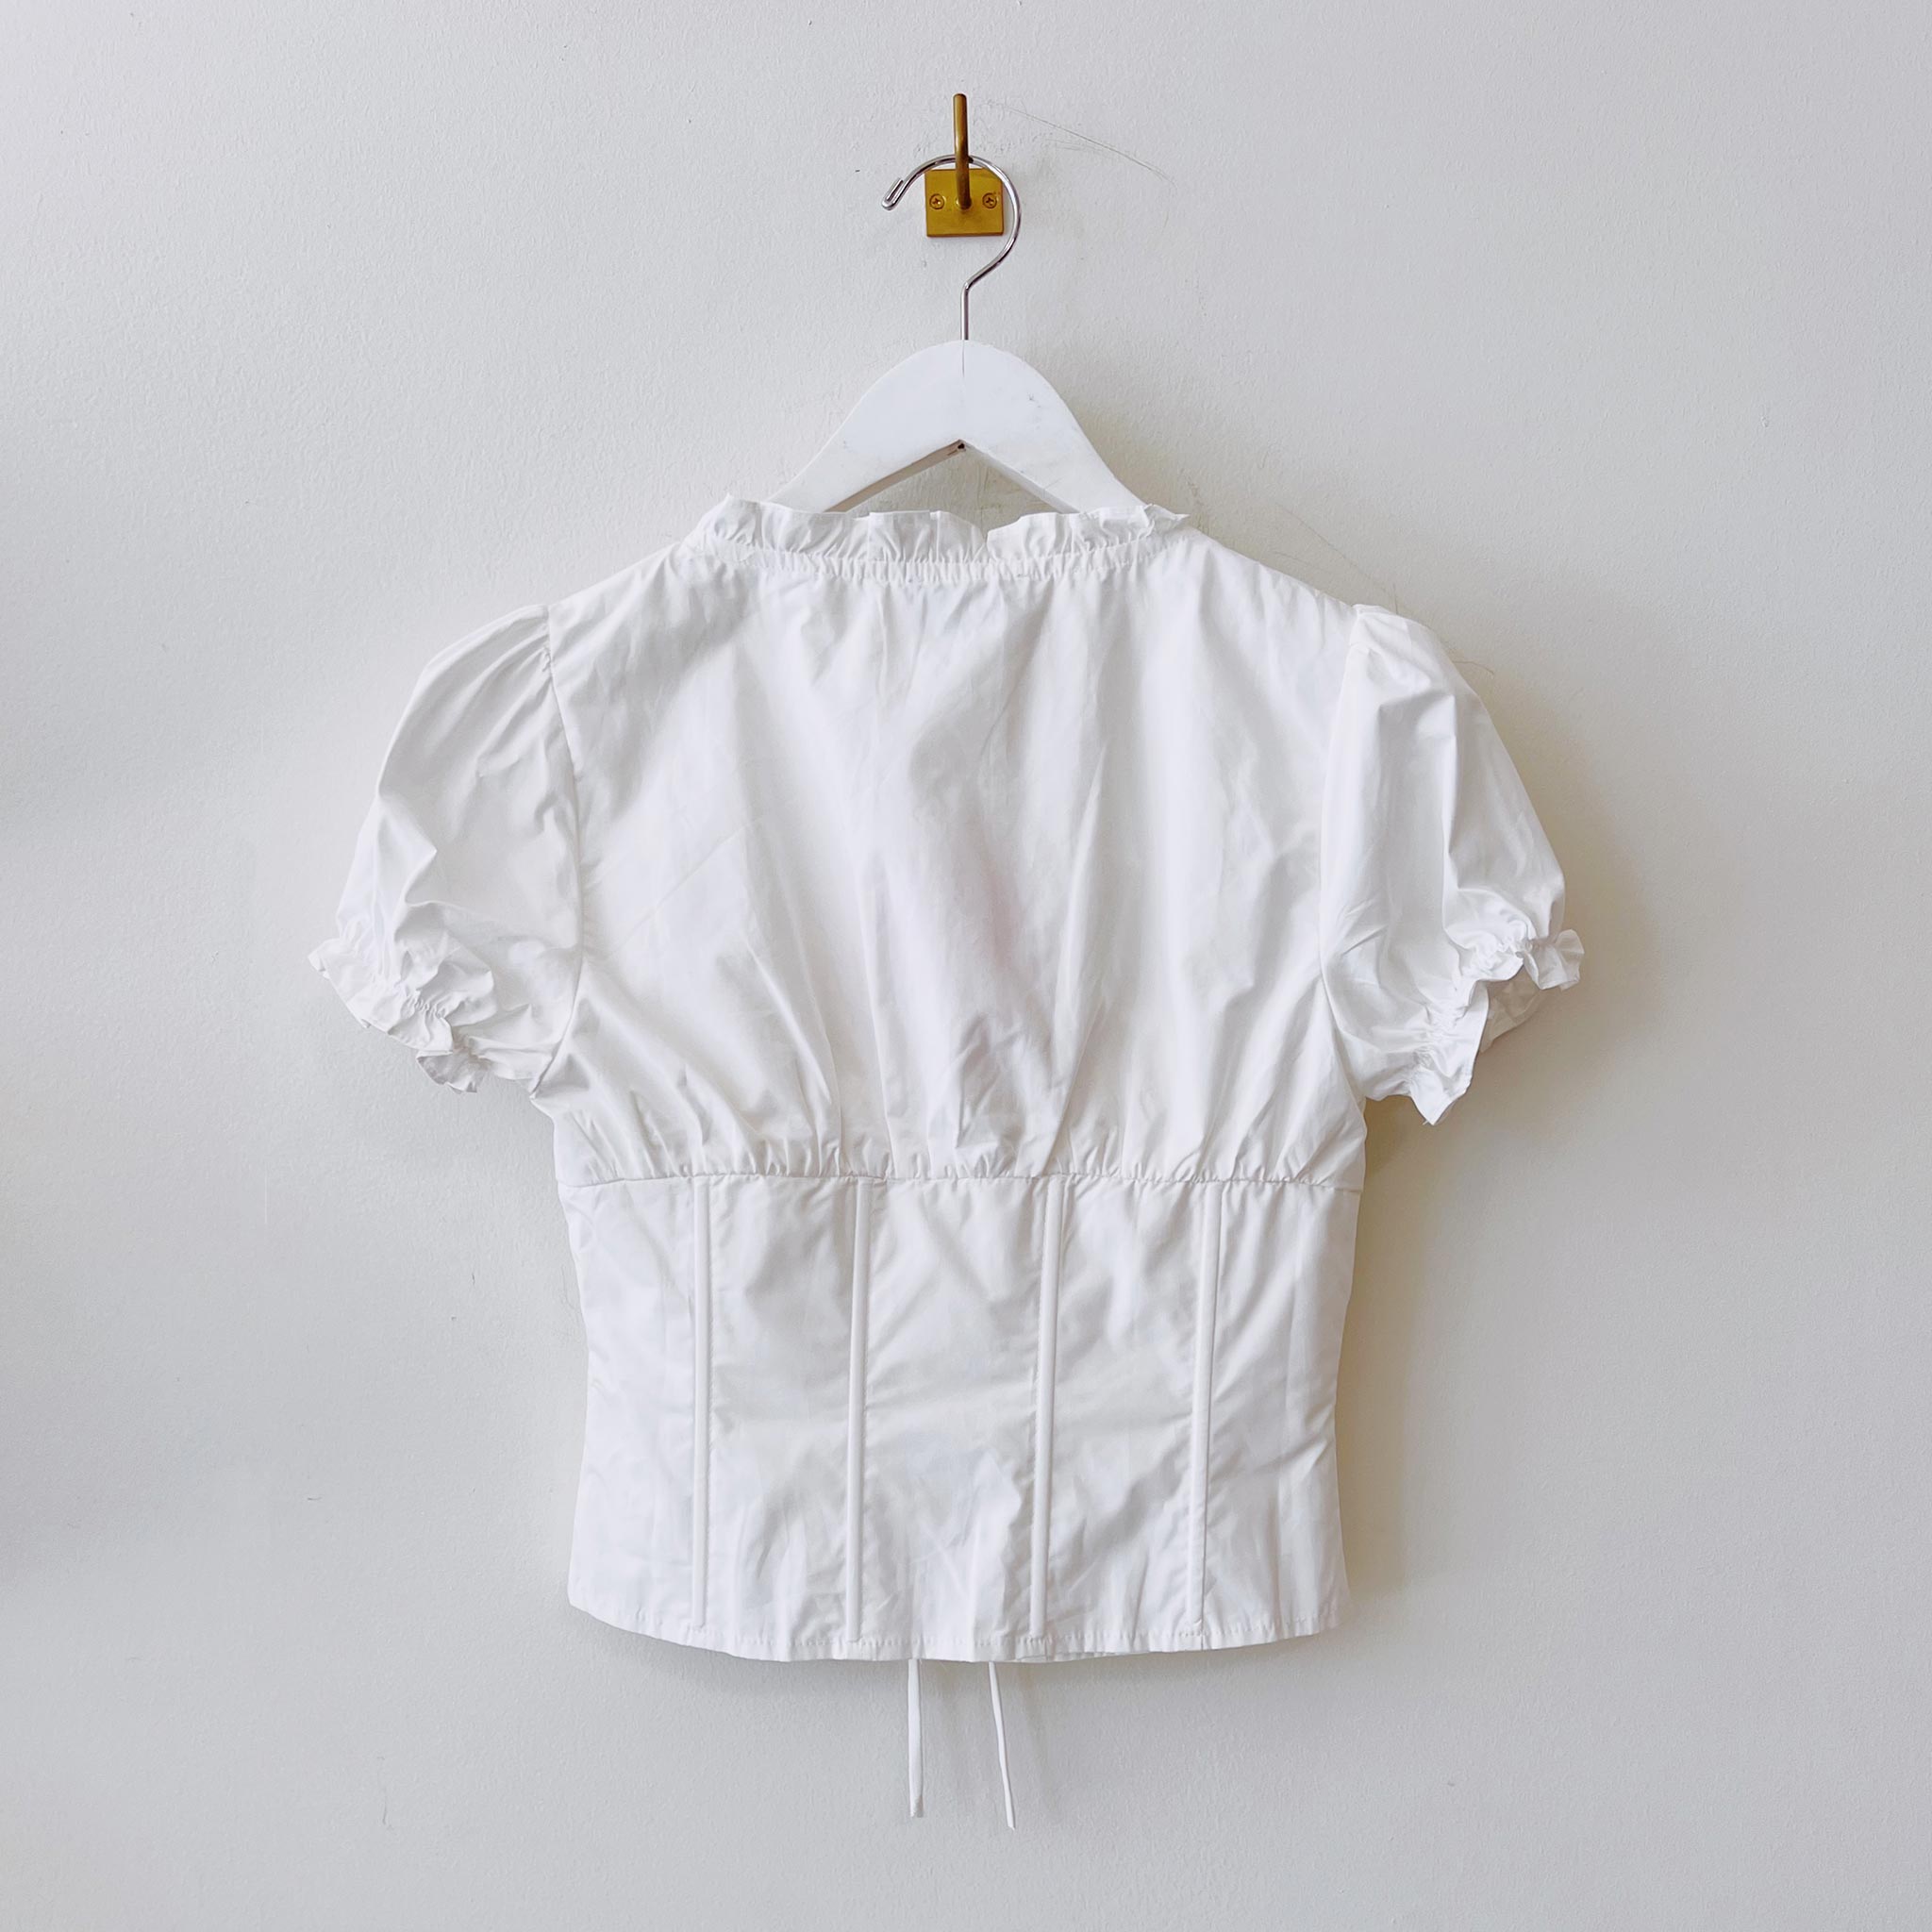 Back hanging photo of the Puff Sleeve V-Neck Top - White.